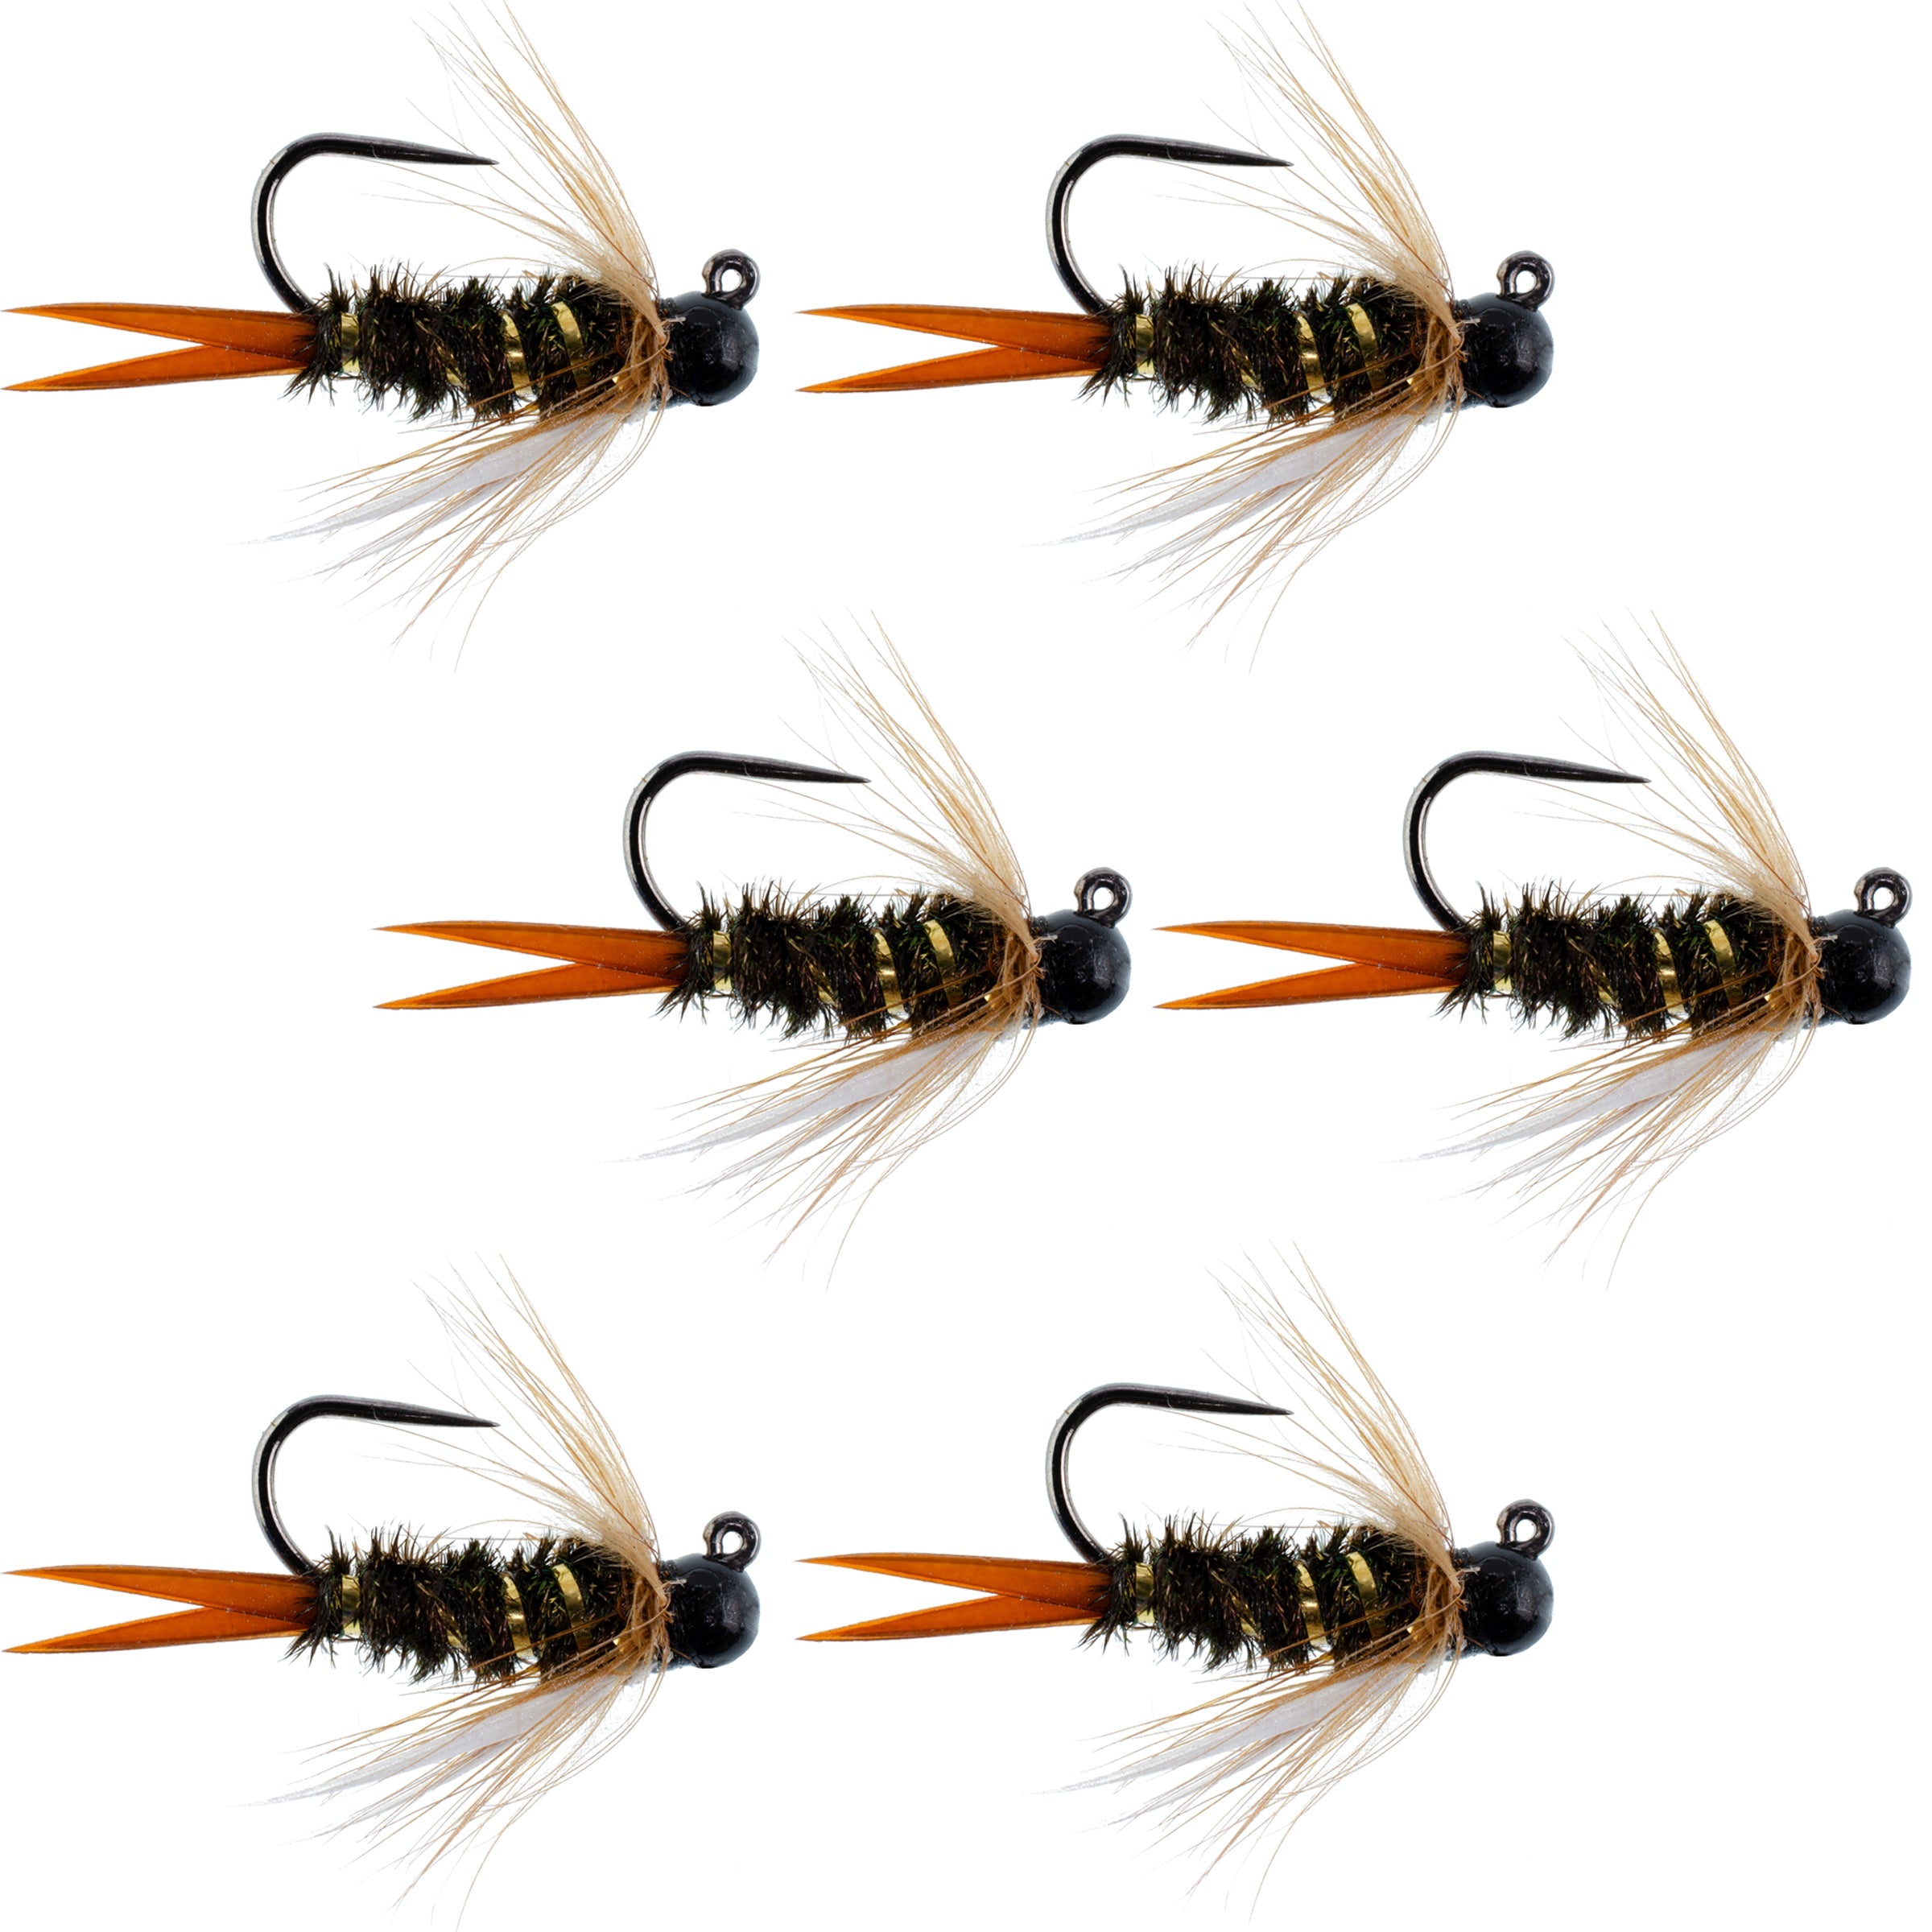 Black Tungsten Bead Prince Jig Tactical Czech Nymph Euro Nymphing Fly - 6 Flies Size 12